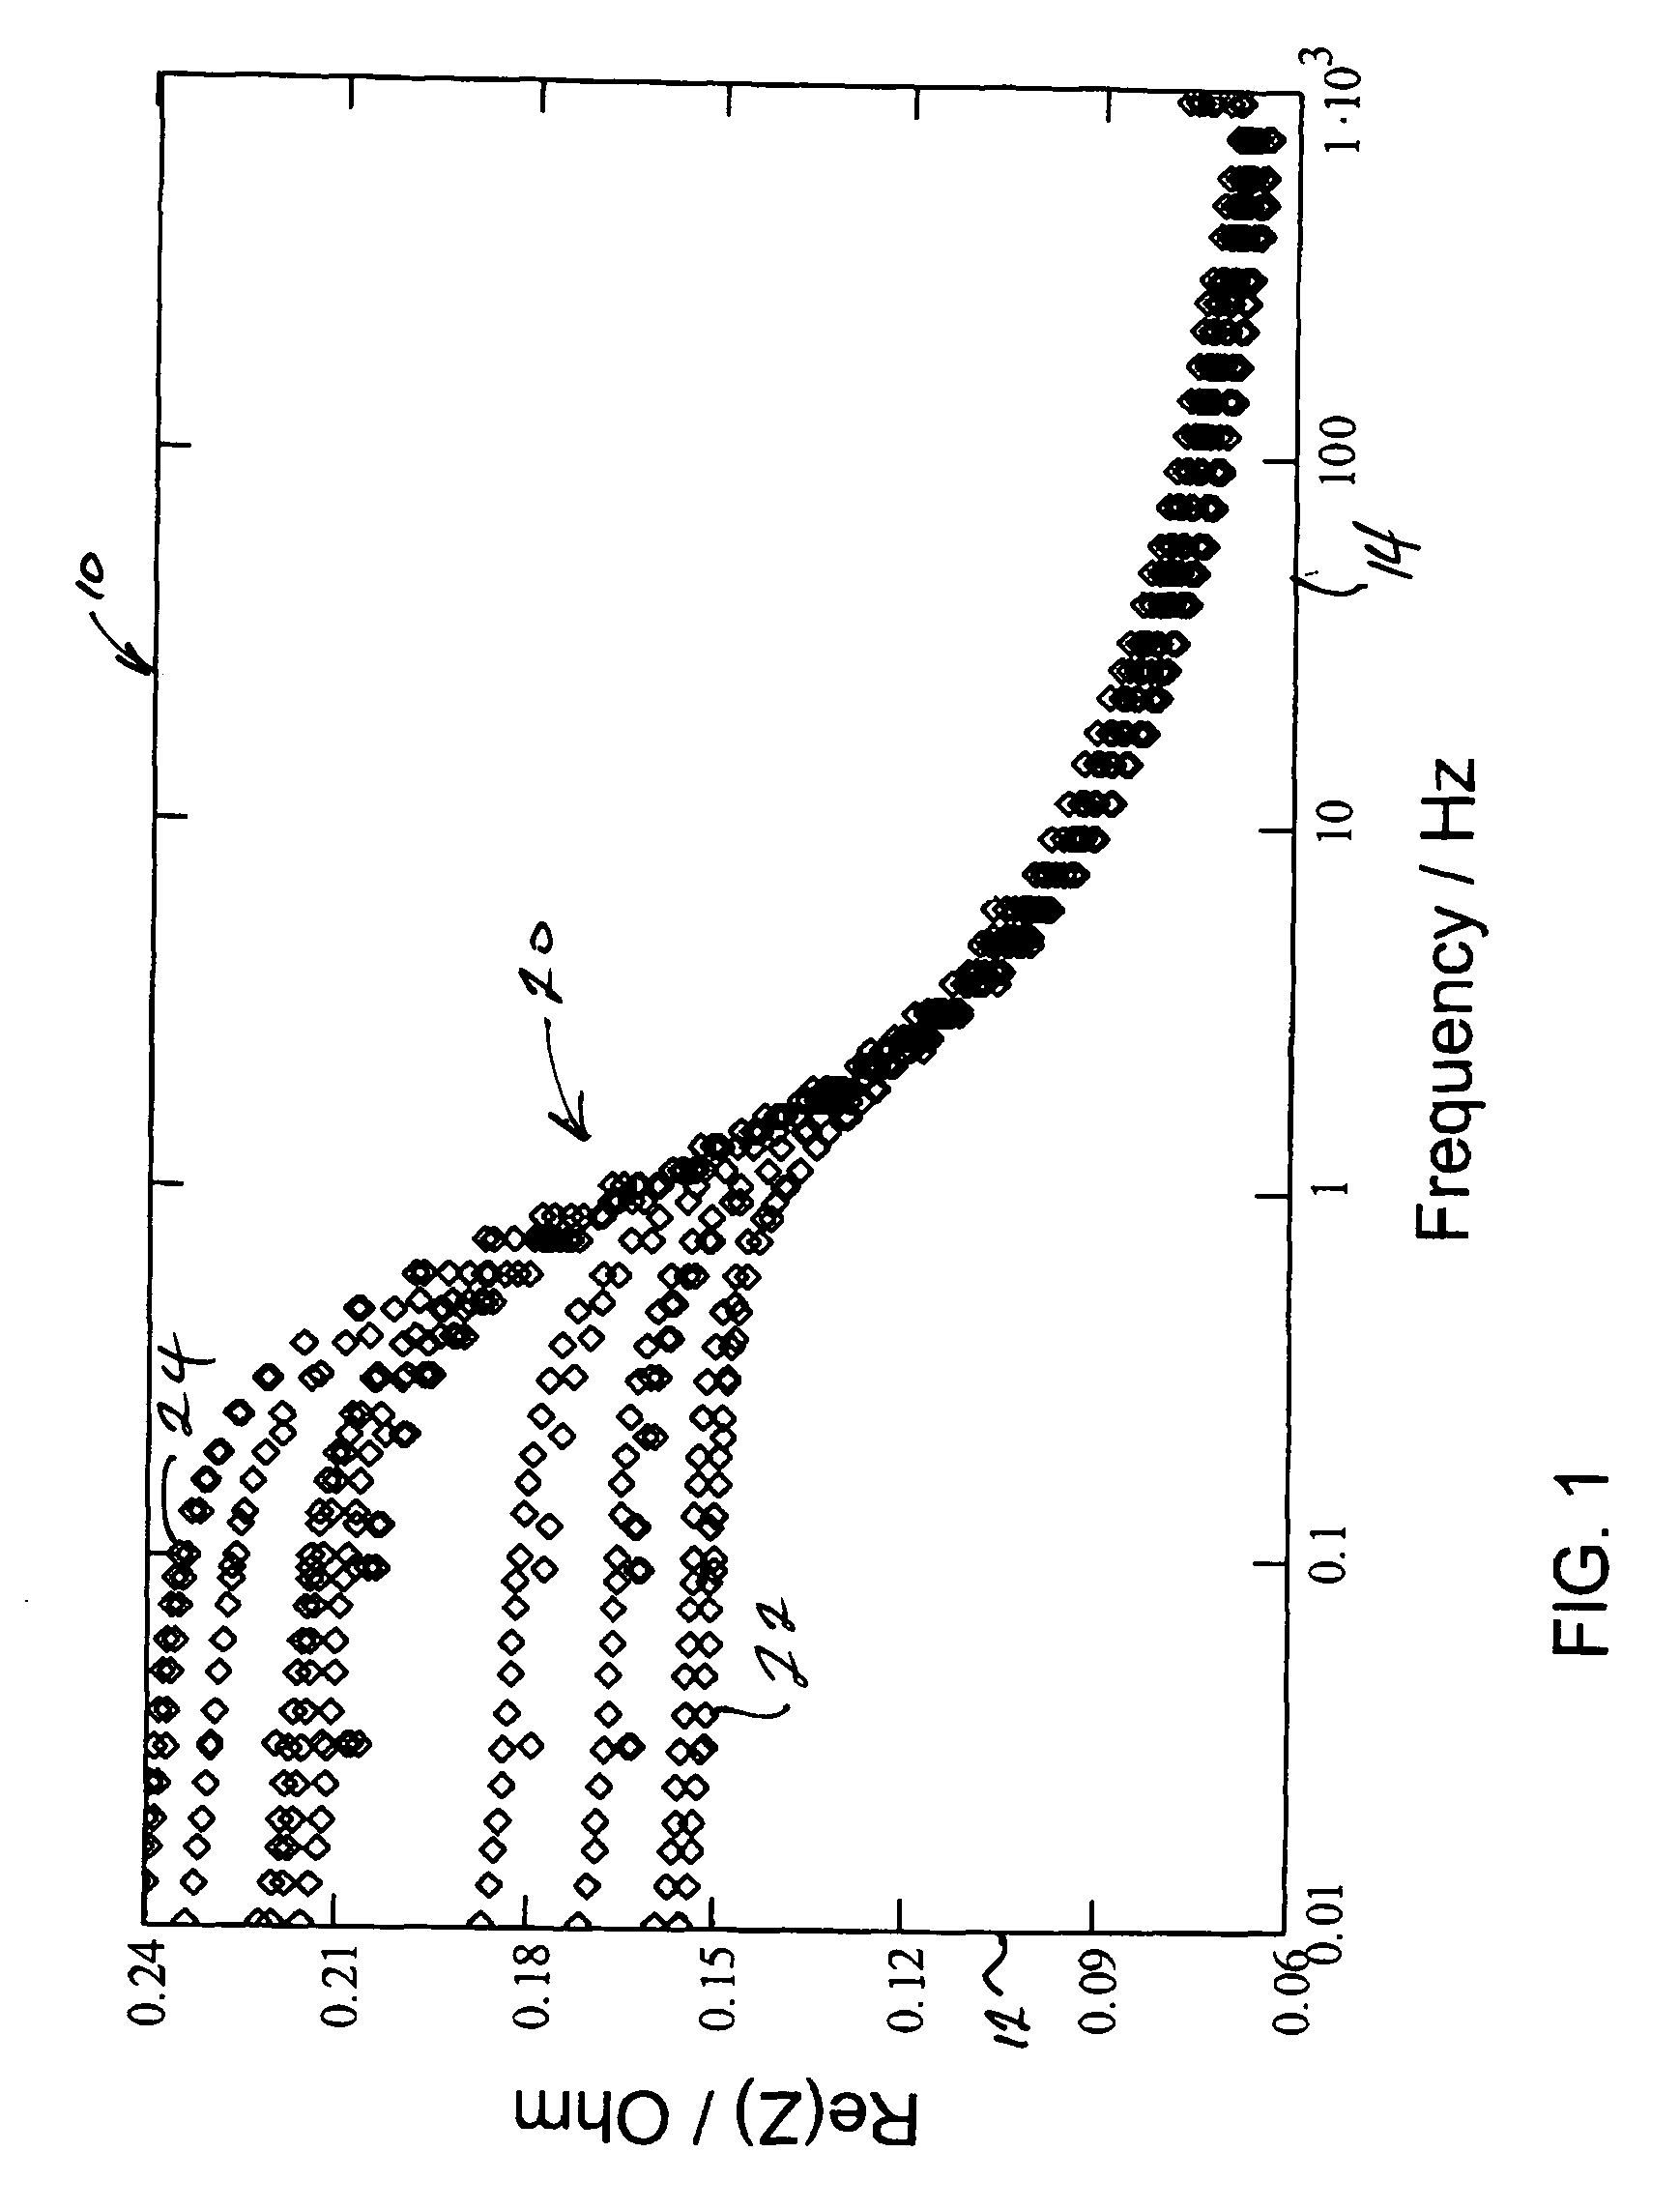 Method and apparatus for operating a battery to avoid damage and maximize use of battery capacity